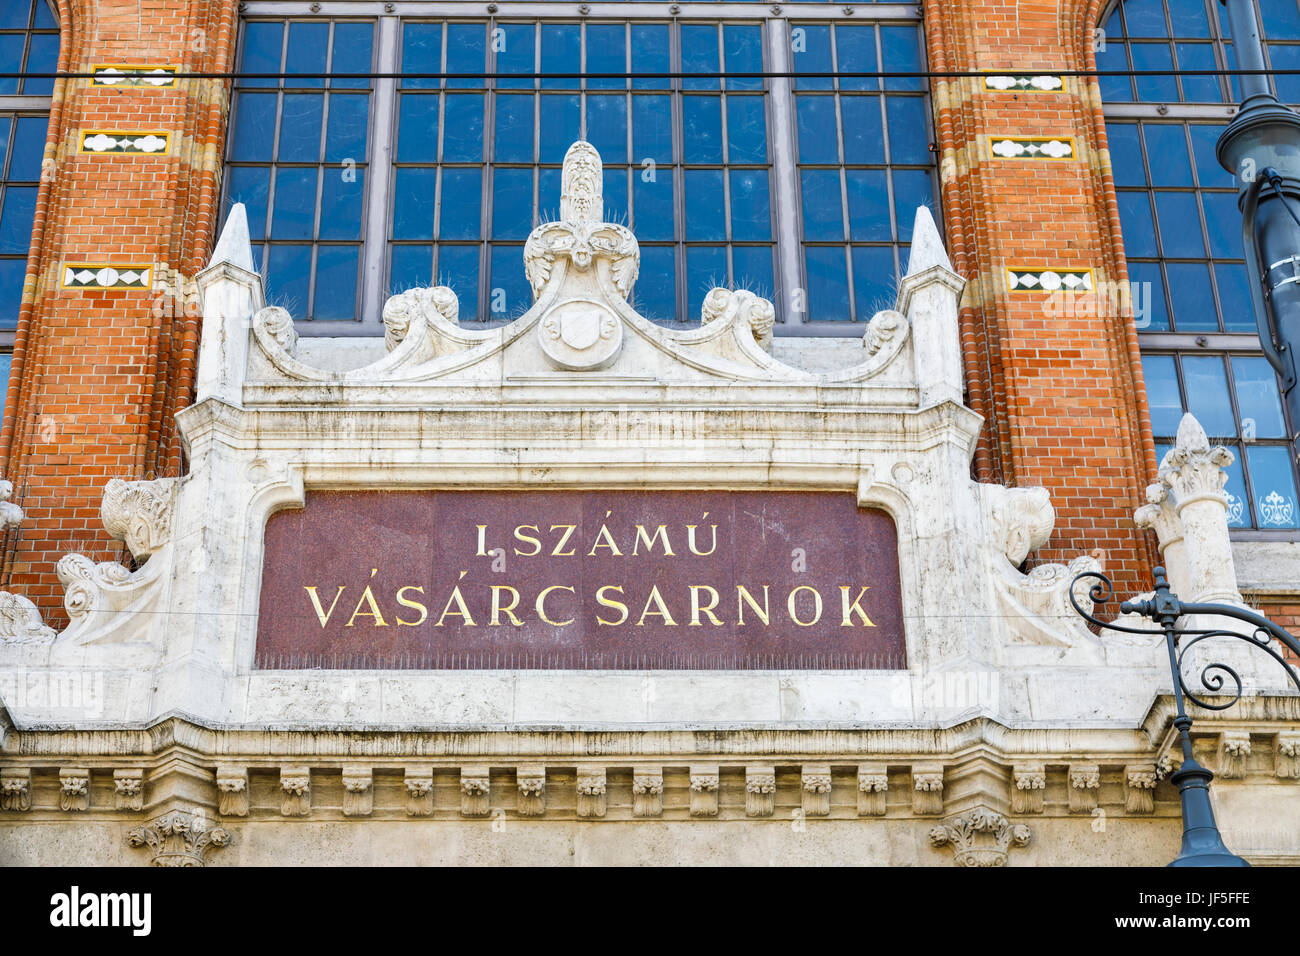 Name sign above the entrance to the indoor market at Central Market Hall (Vasarcsarnok), at end of Vaci ucta, Pest, Budapest, capital city of Hungary Stock Photo